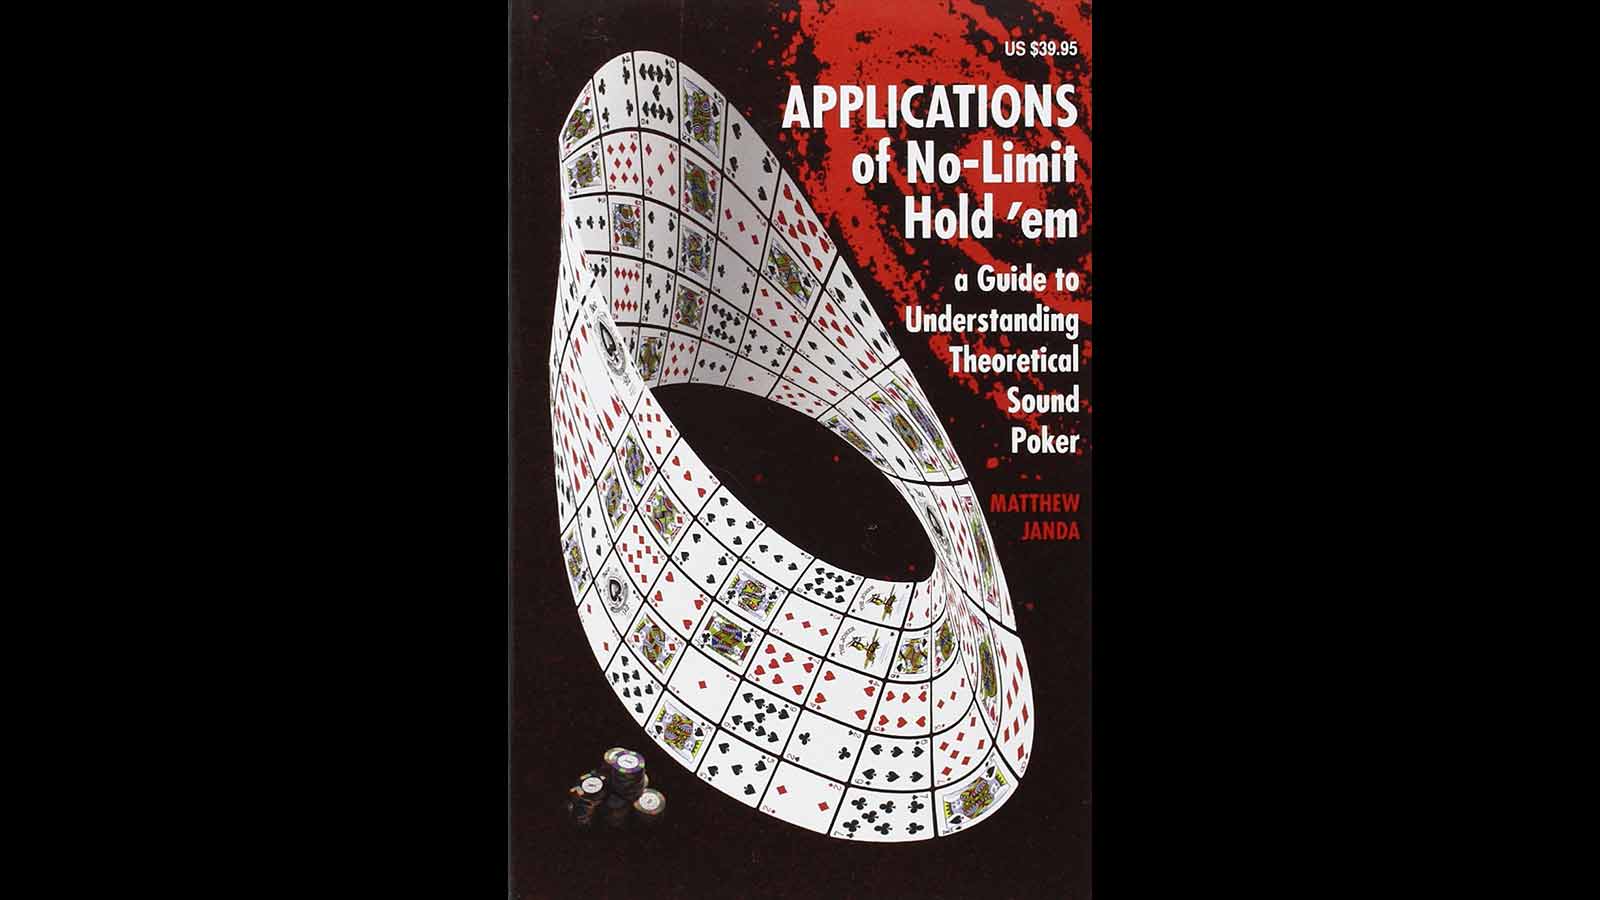 Applications of No-Limit Hold’em